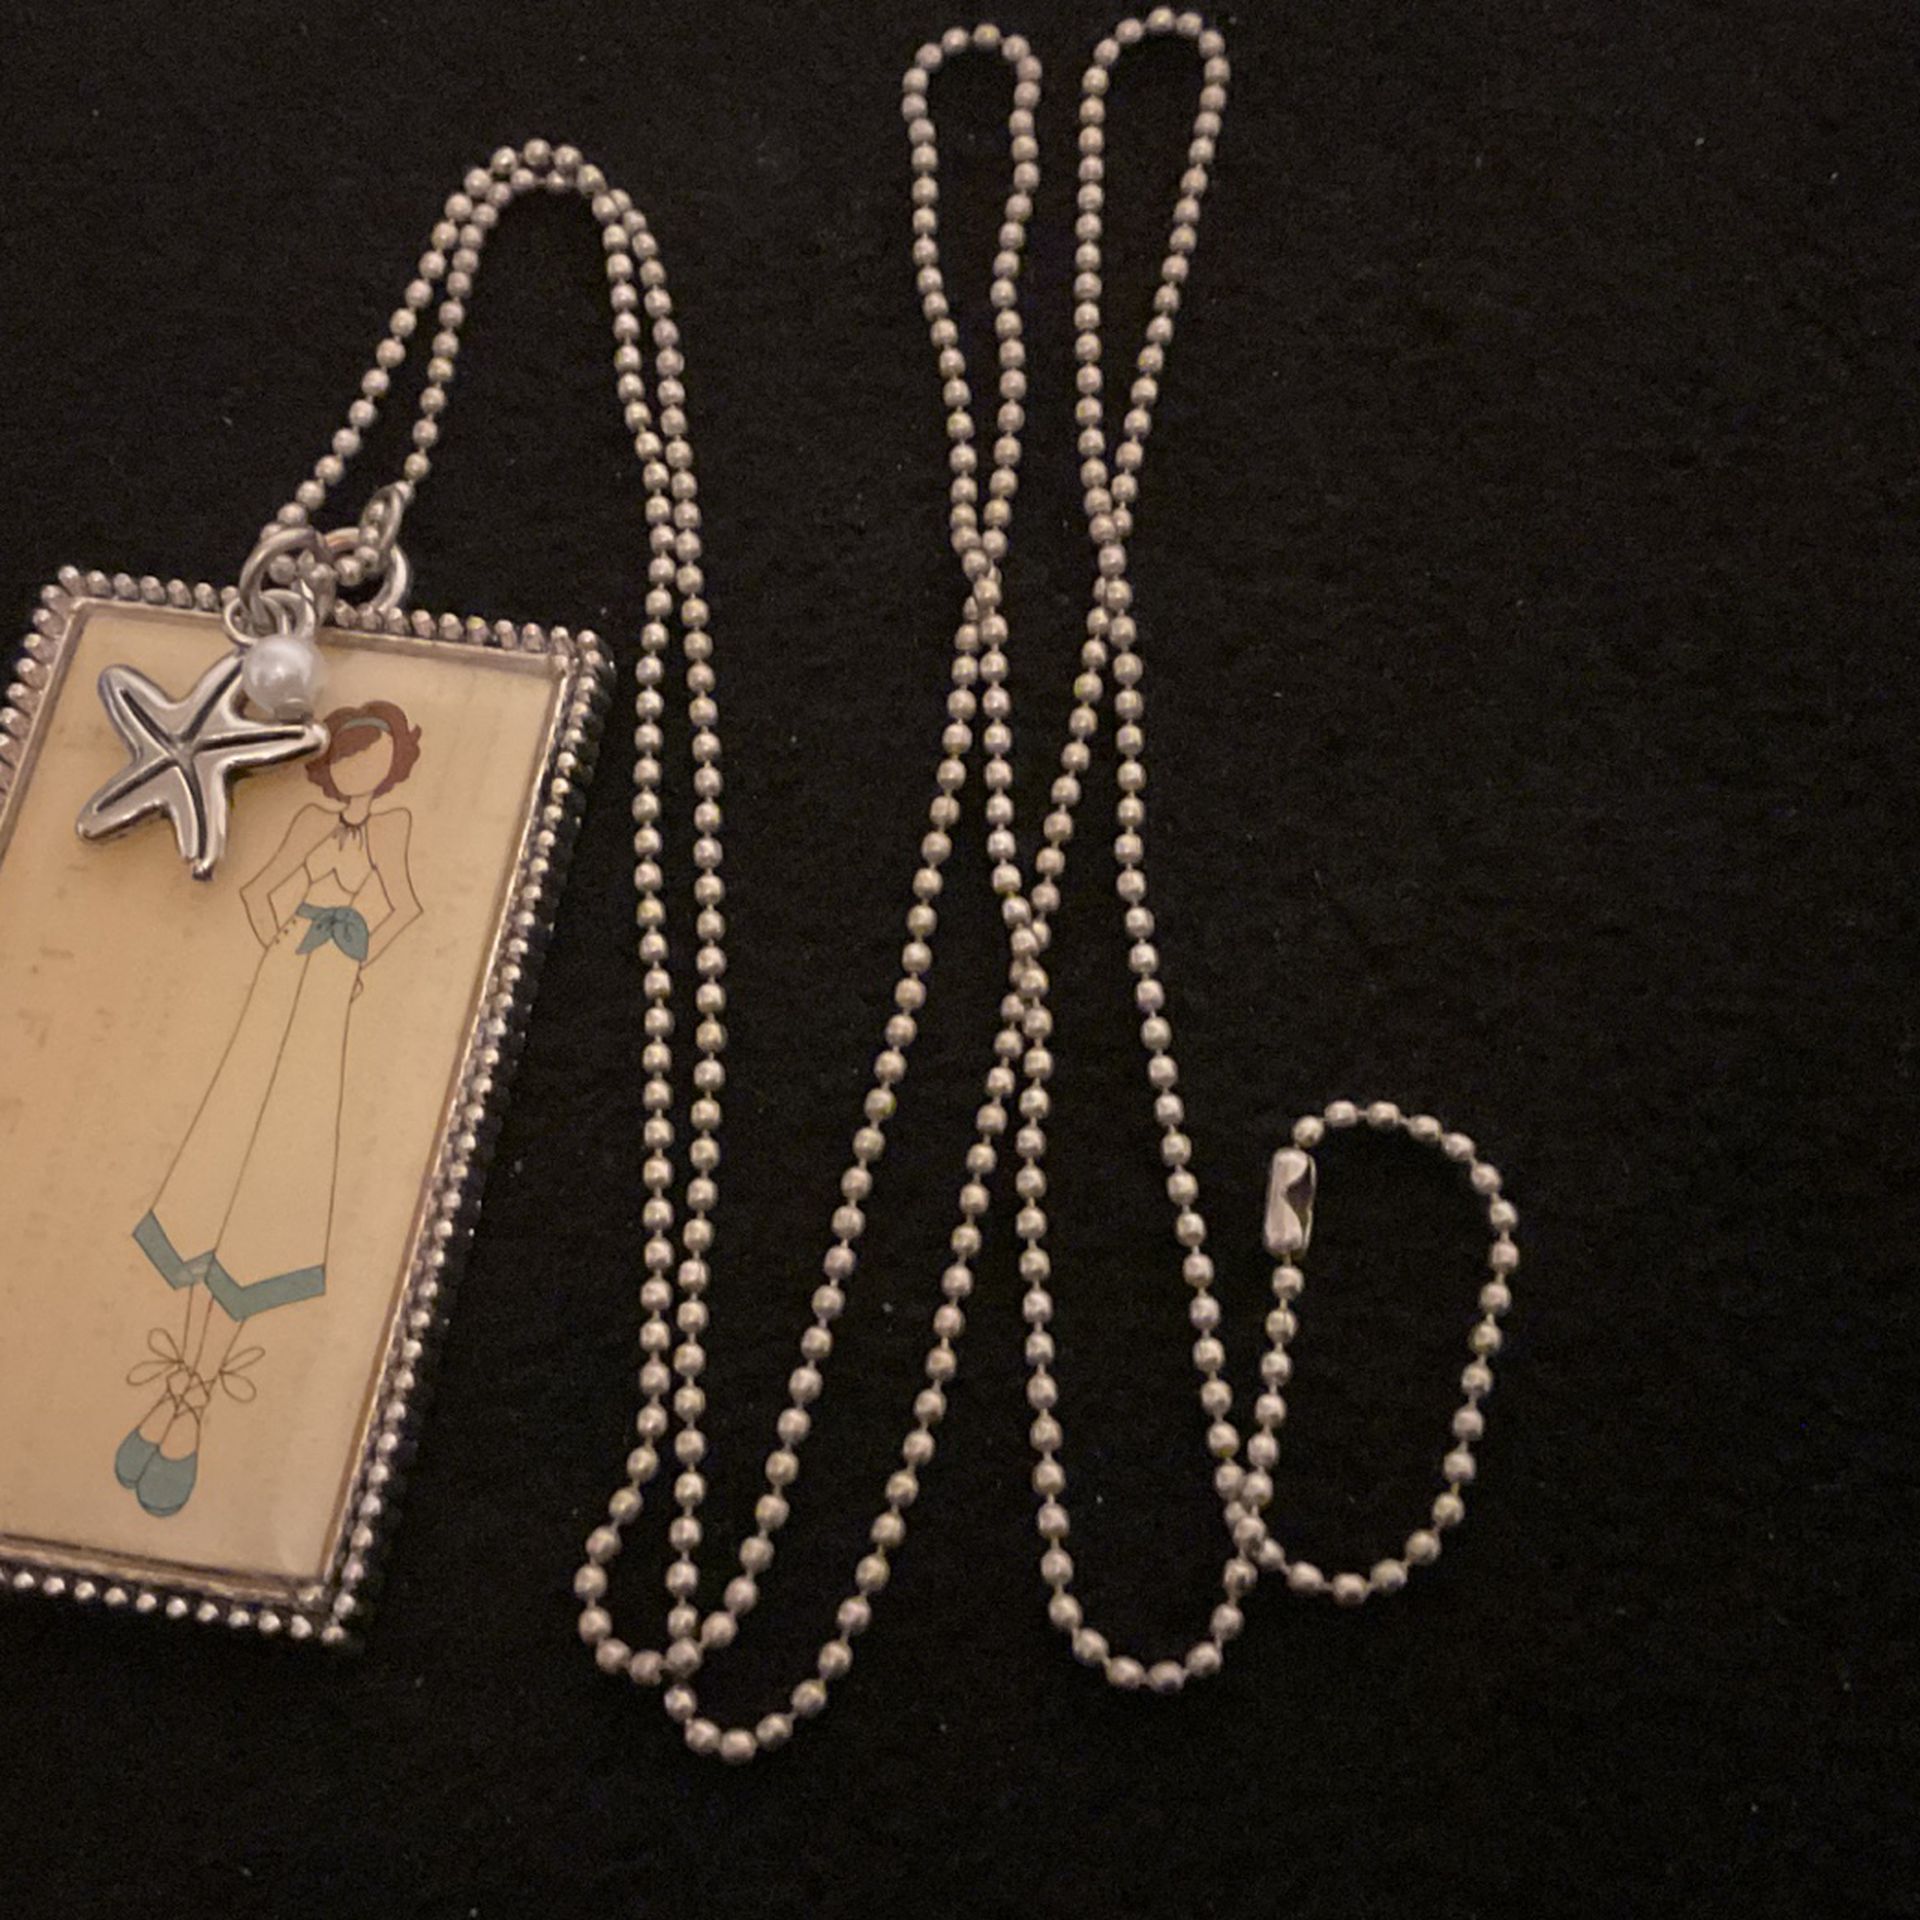 30” SilverTone Dog chain Necklace With Dog Tag Pendant And 2 Charms